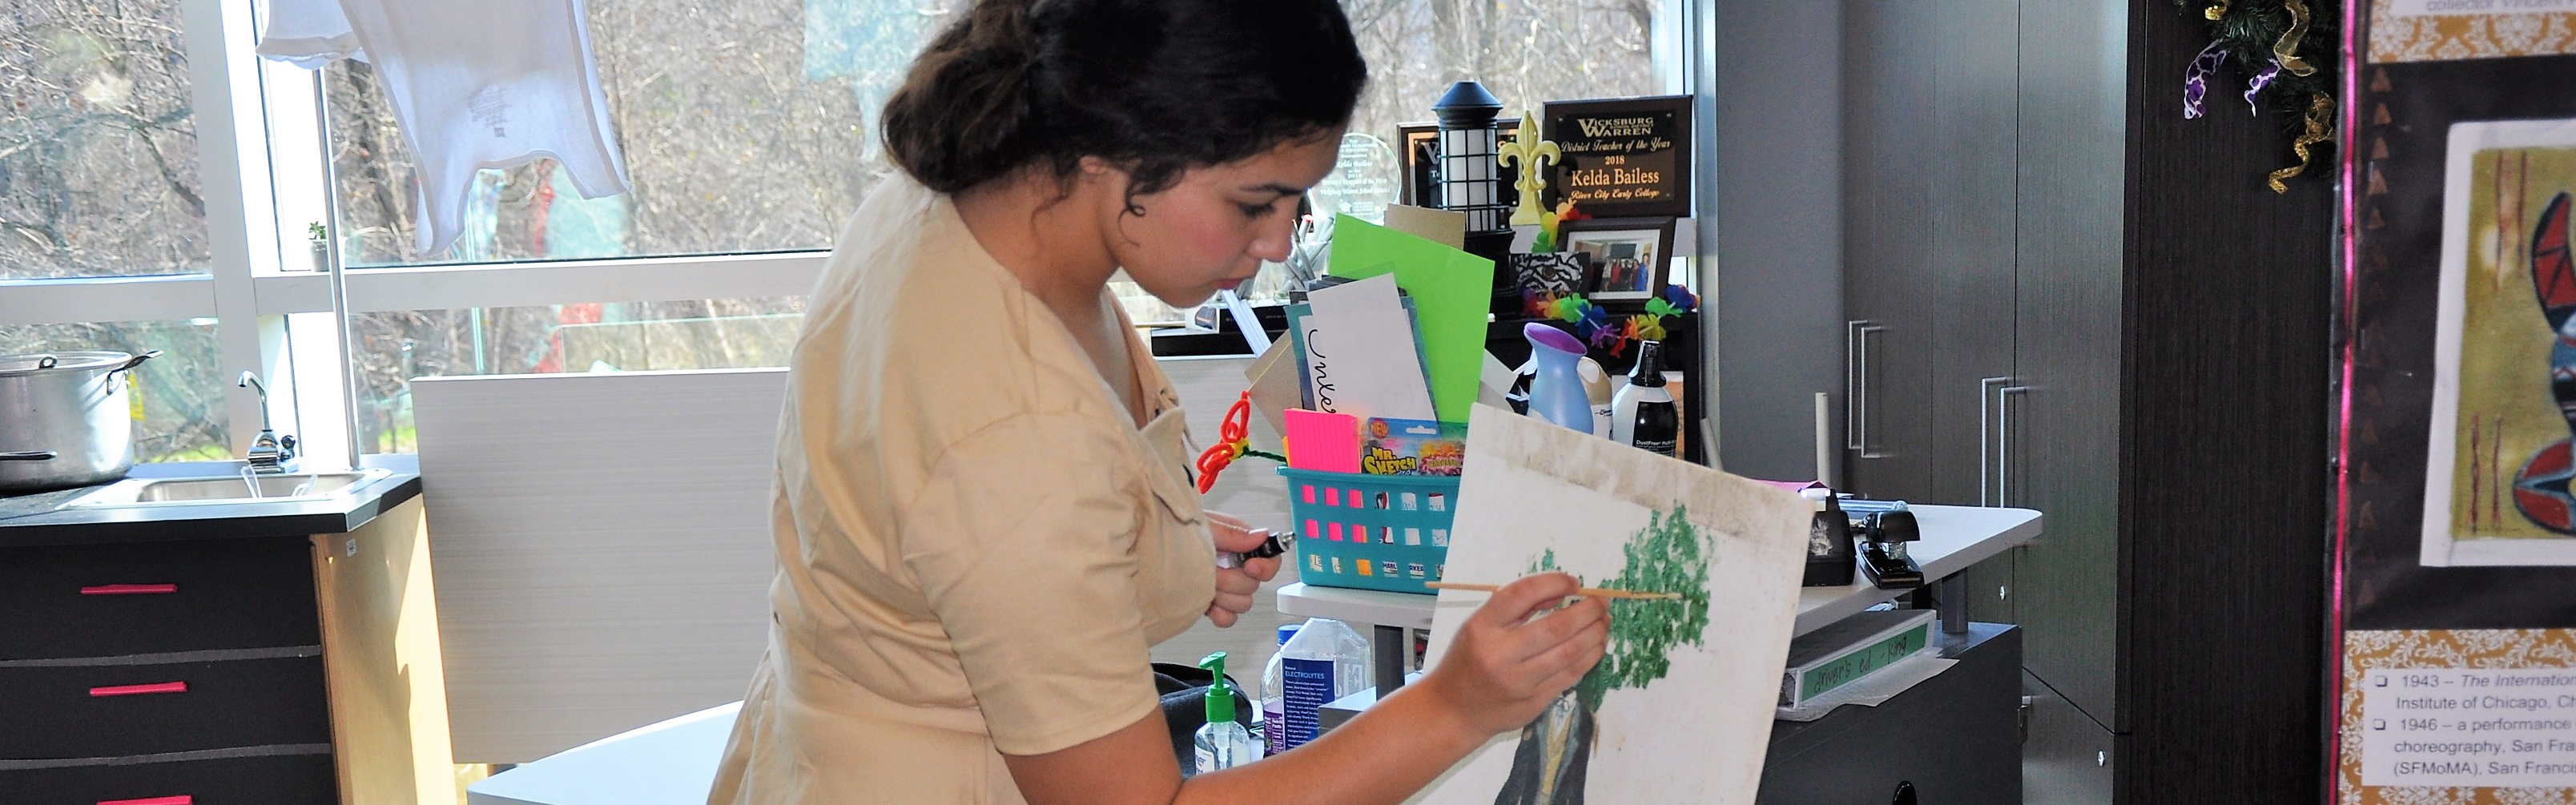 Young white female student paints at an easel. She is painting an image of a gentleman wearing a suit with a green tree in the background. The student is wearing a beige dress. 